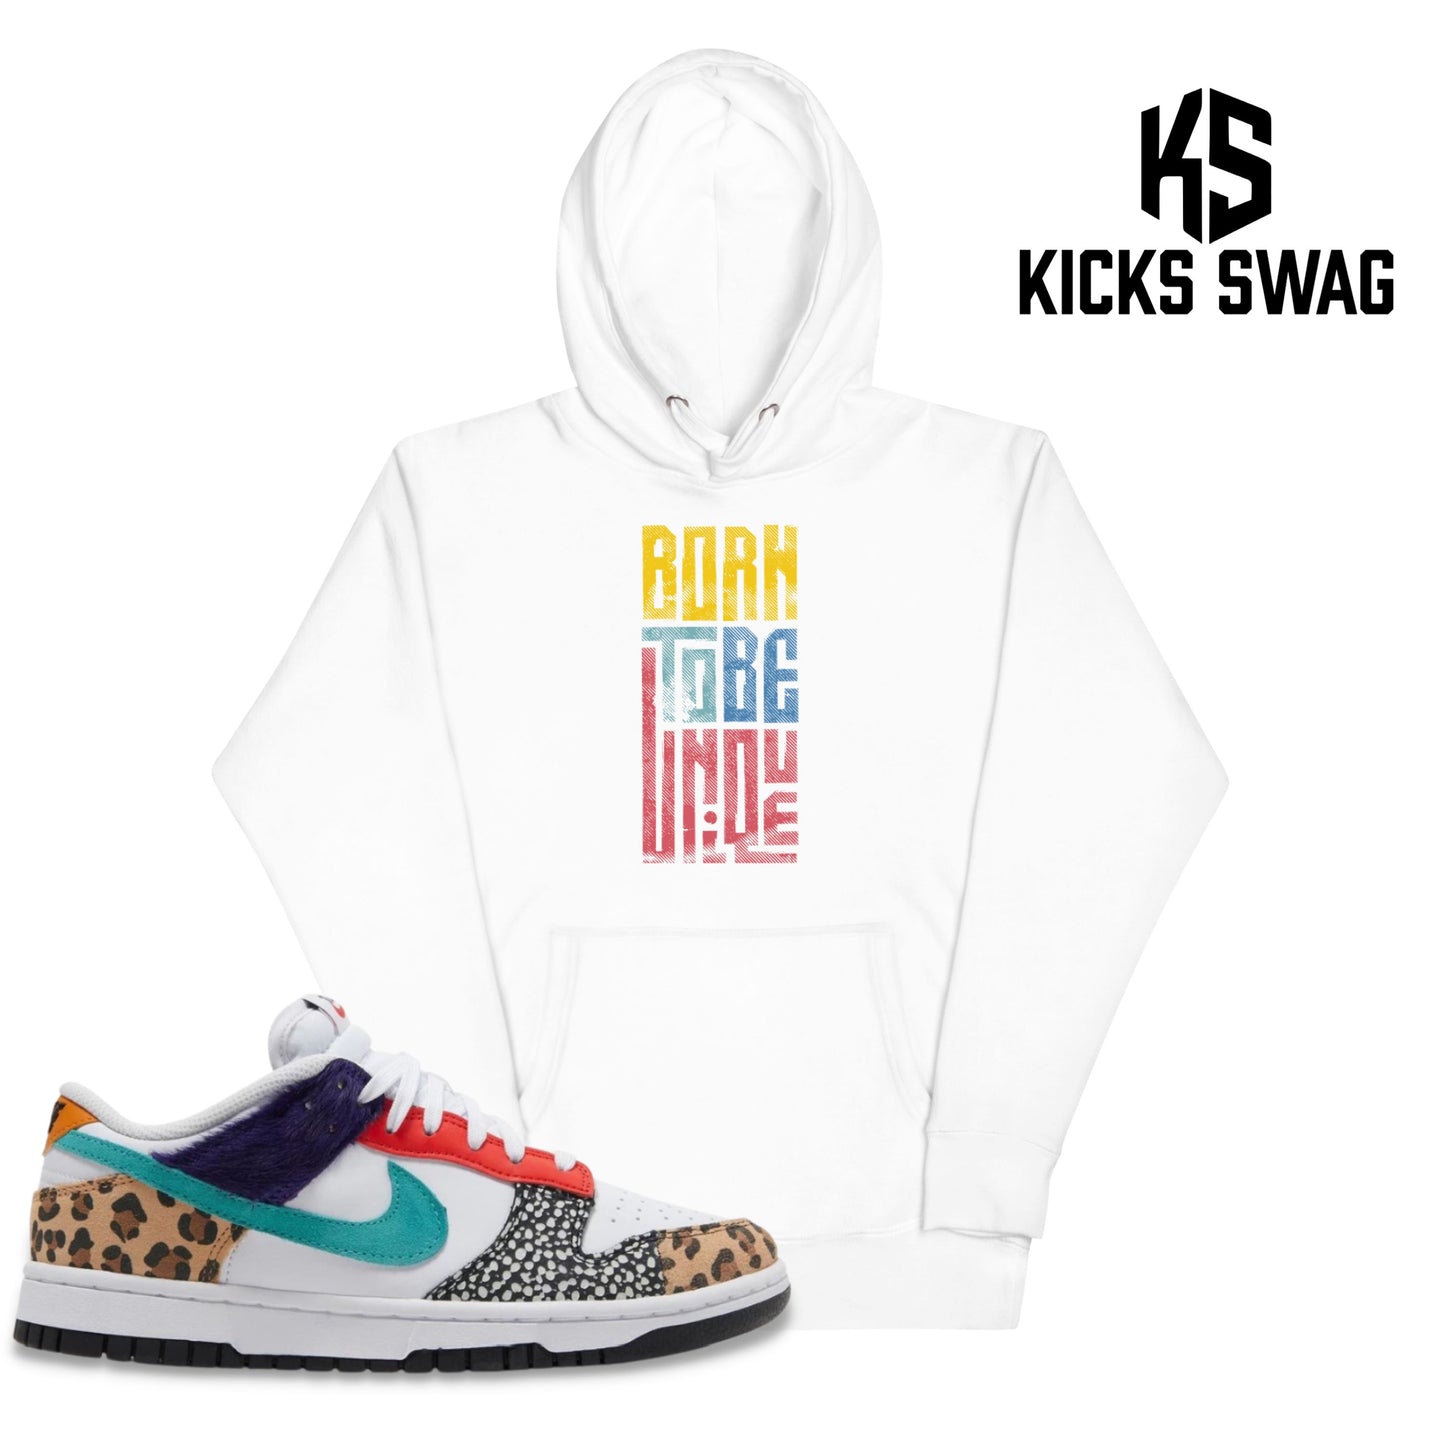 Hoodie - Nike dunk low safari mix (Born to be unique)